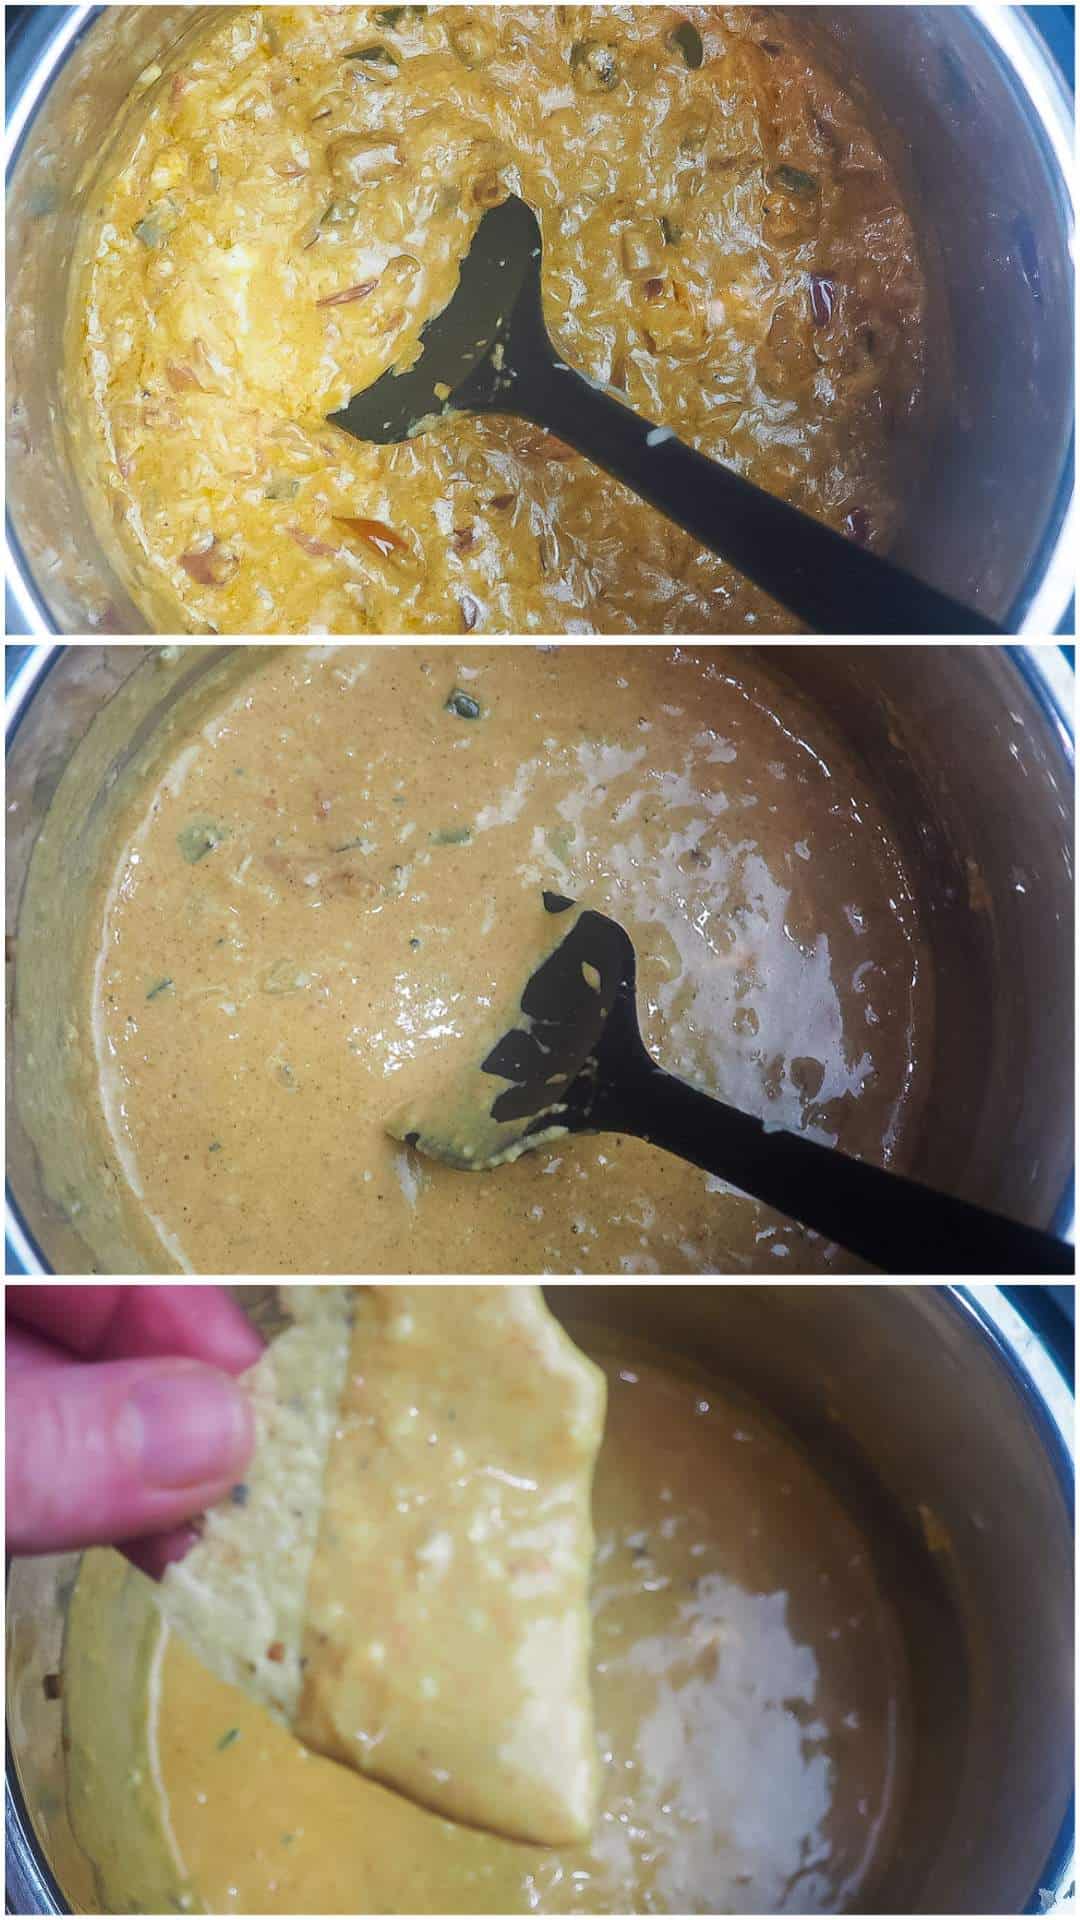 A collage of three images showing cheddar cheese melting into queso.